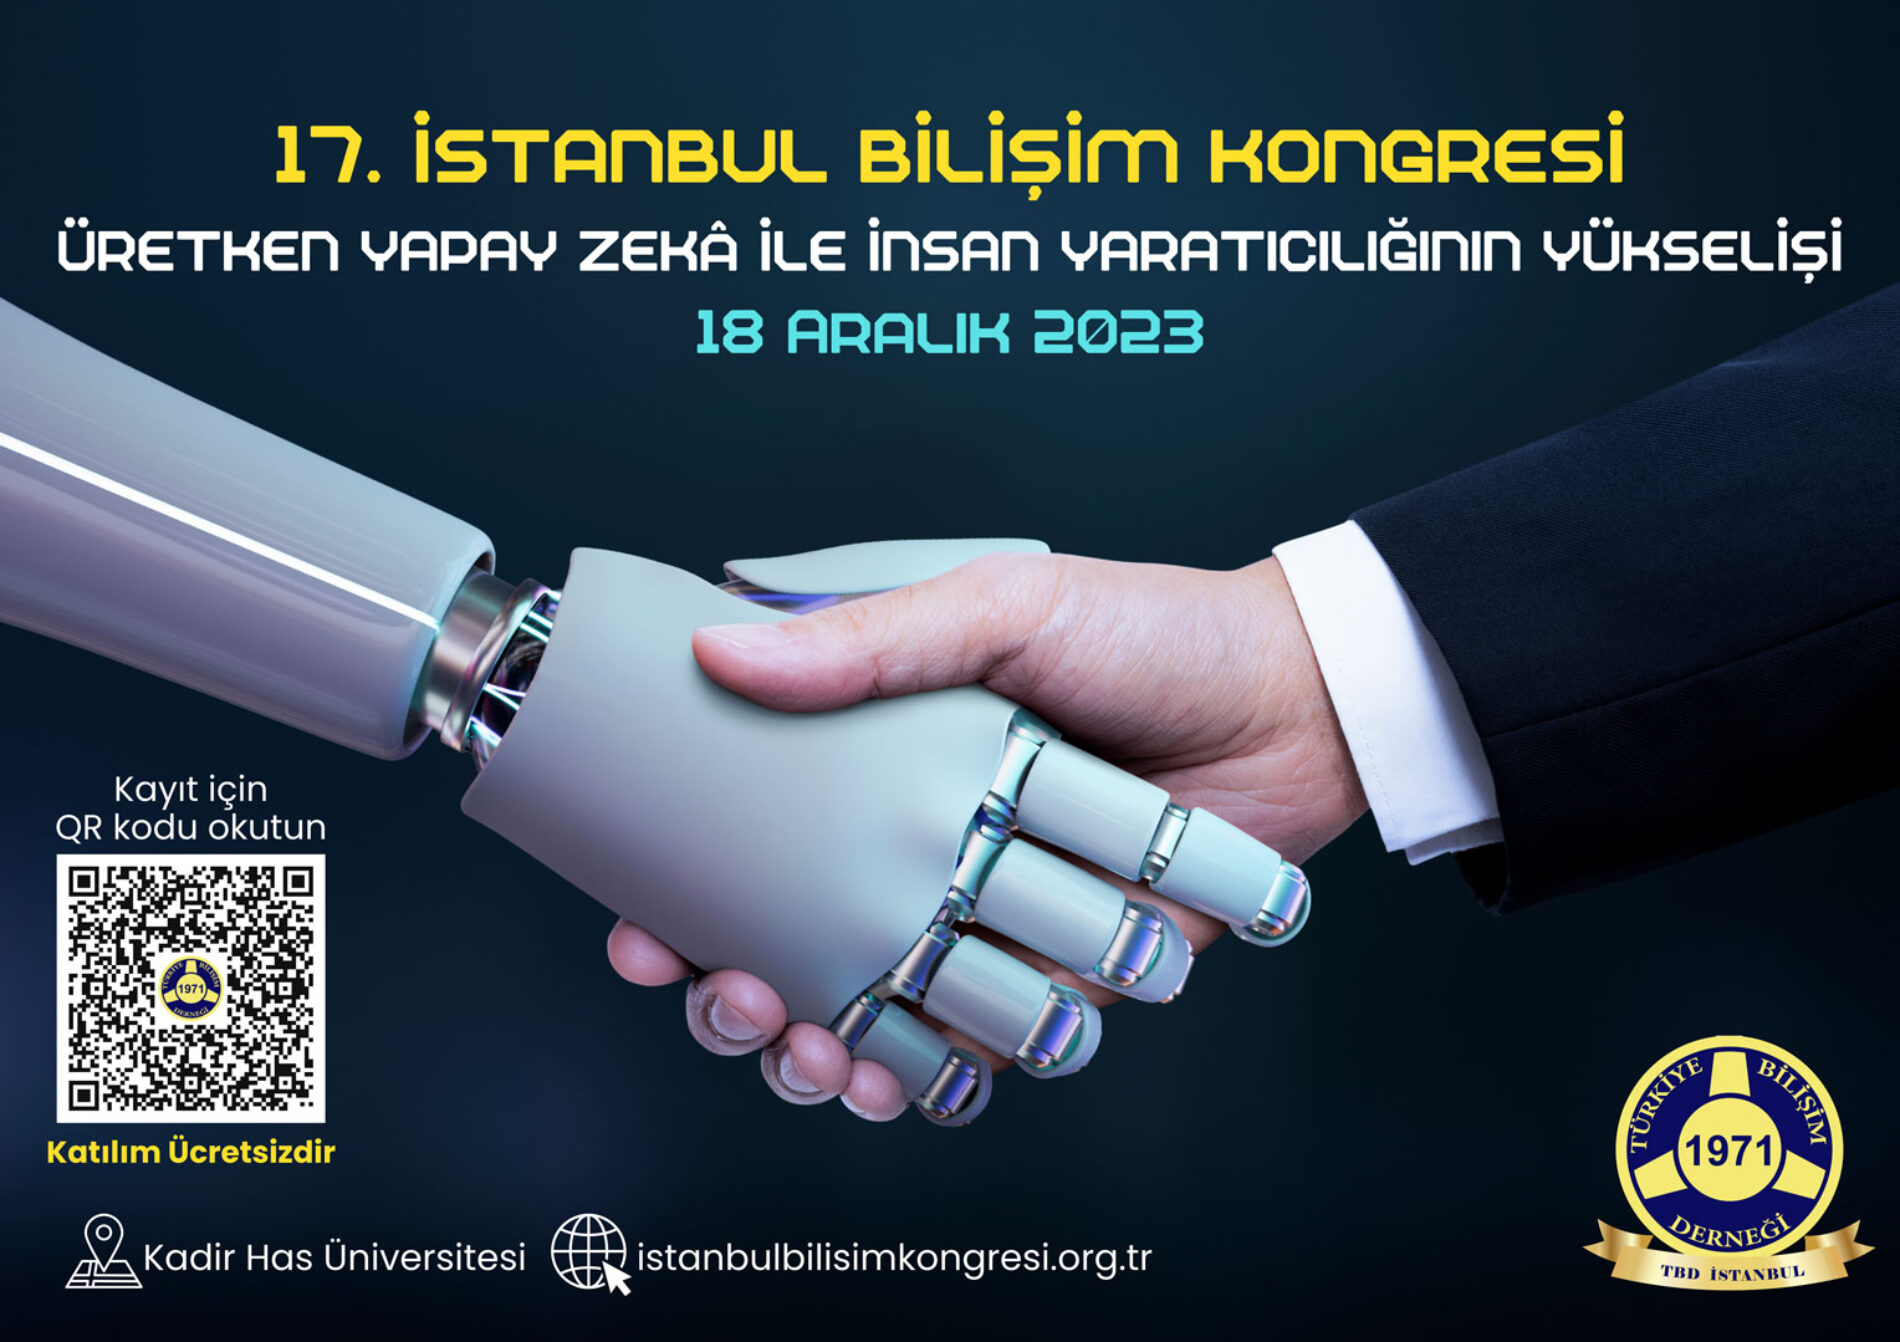 17TH ISTANBUL INFORMATION CONGRESS